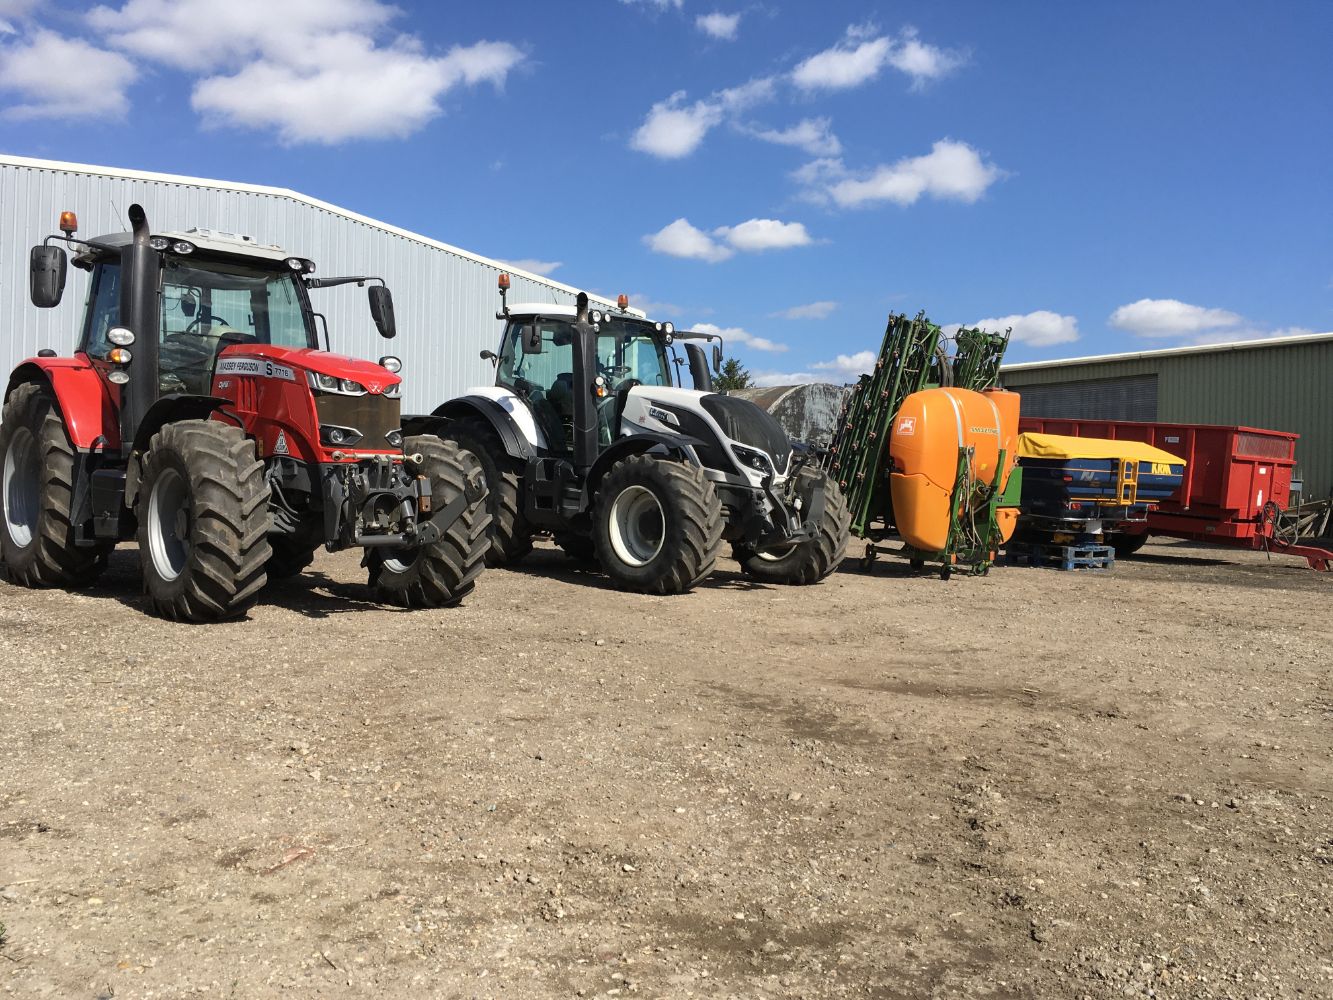 SALE BY ONLINE TIMED AUCTION OF MODERN FARM MACHINERY AND EQUIPMENT